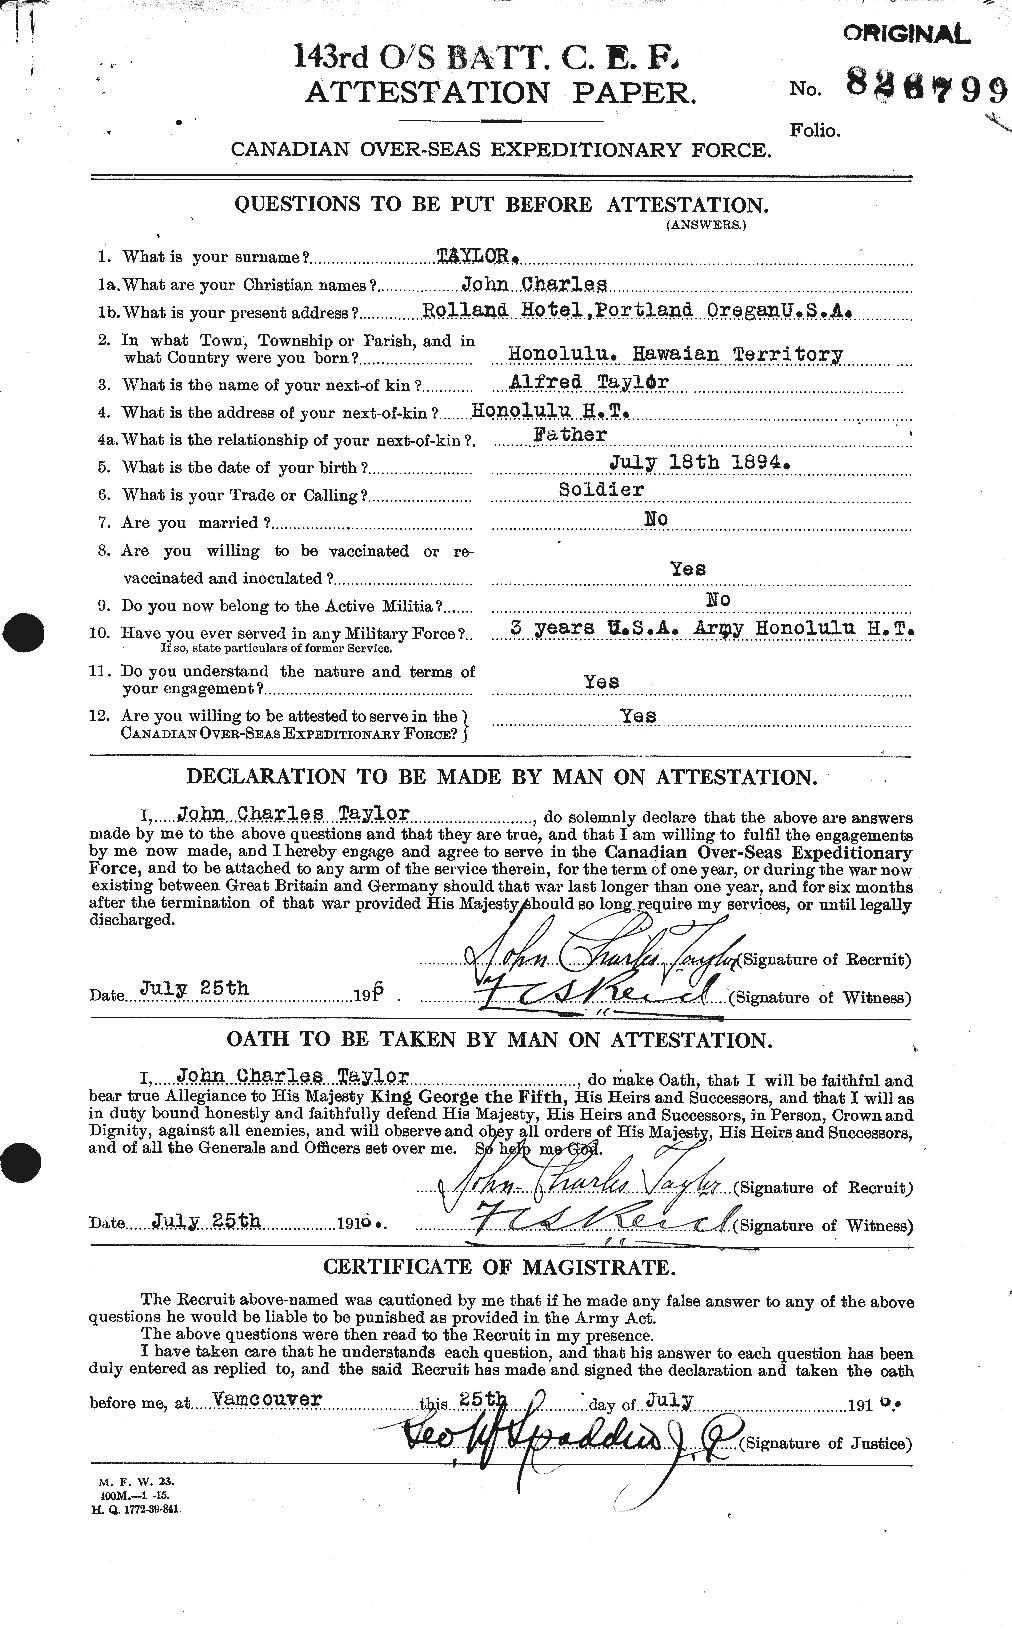 Personnel Records of the First World War - CEF 627056a